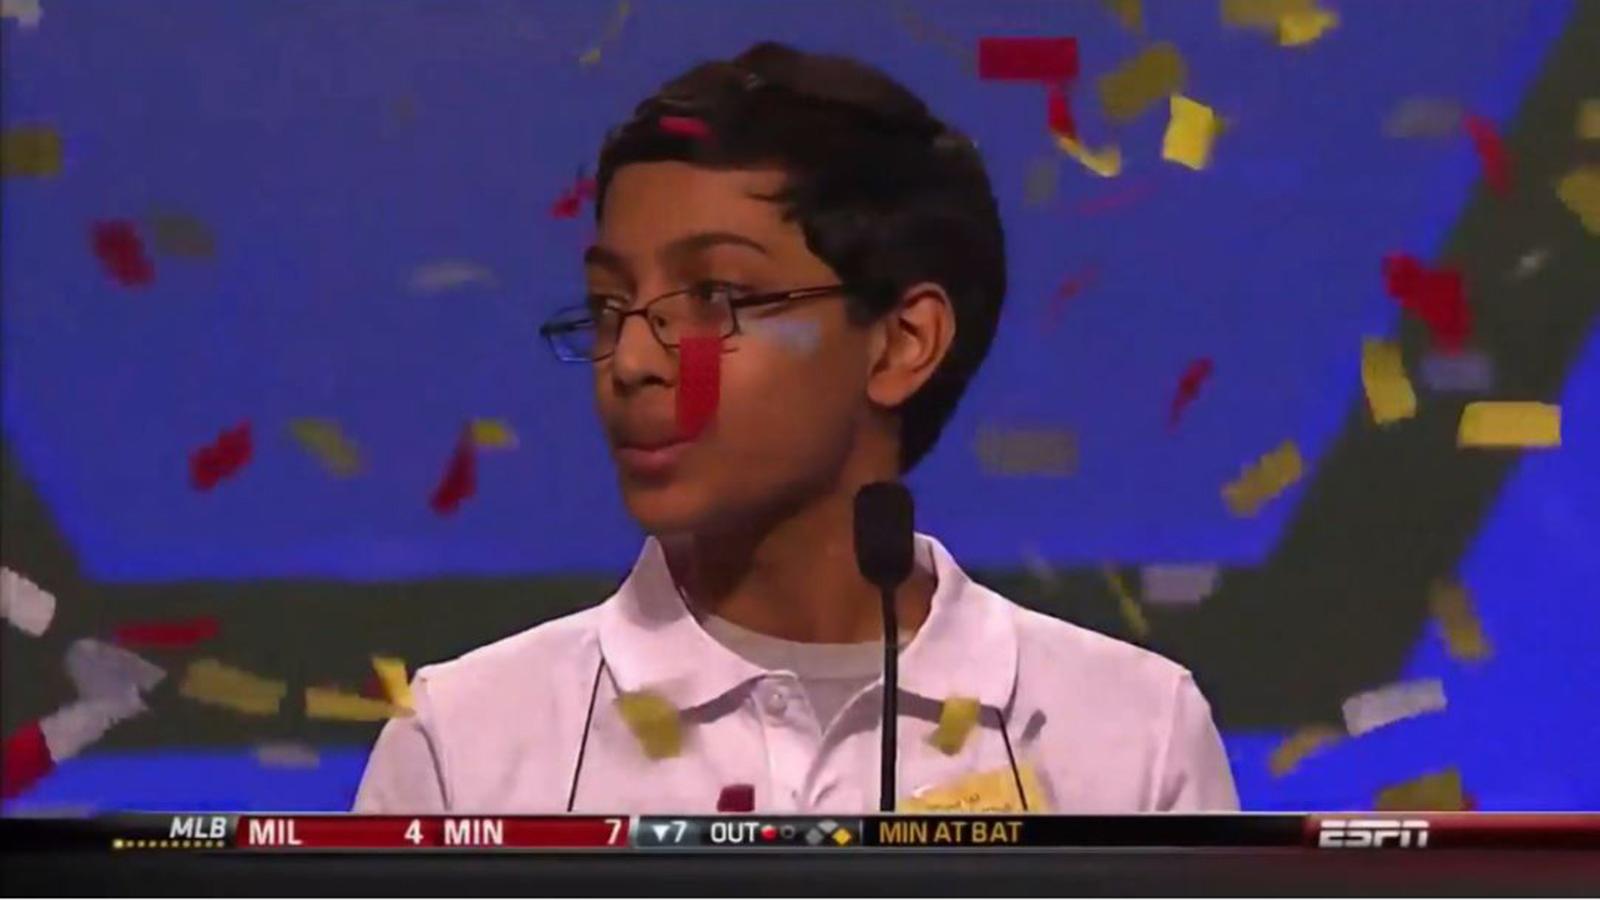 Spelling Bee contestant with confetti